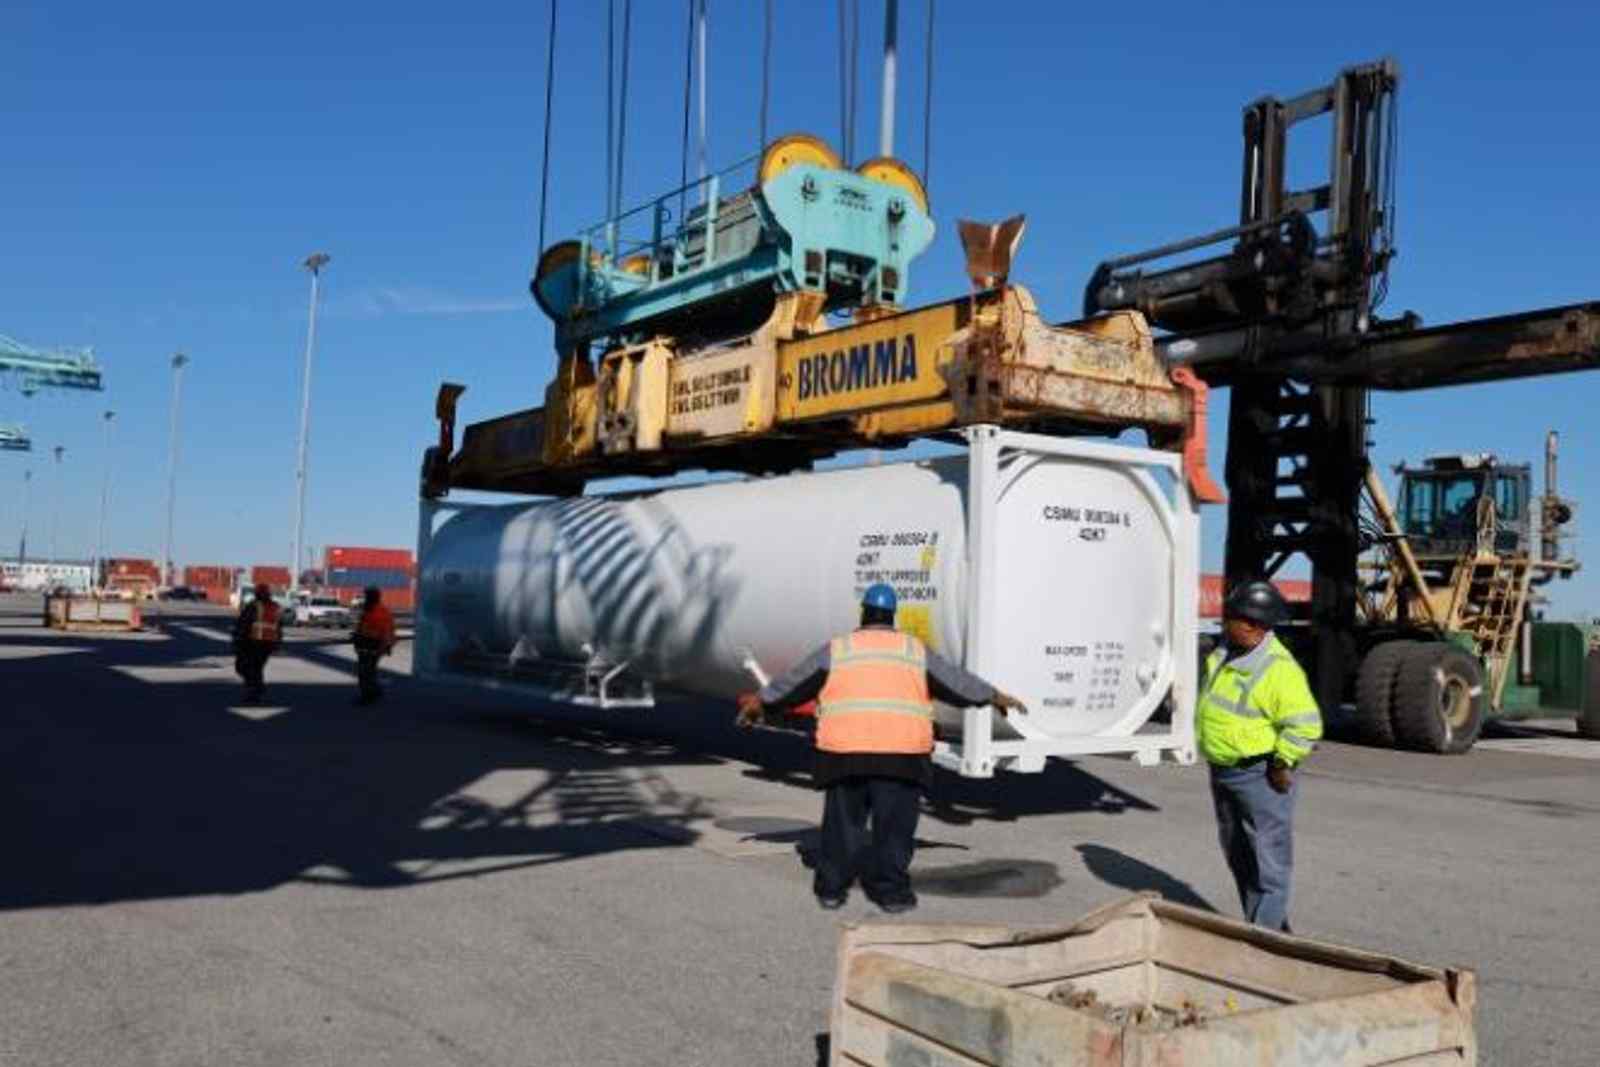 JAXPORT partners support continued growth of LNG as a clean marine fuel